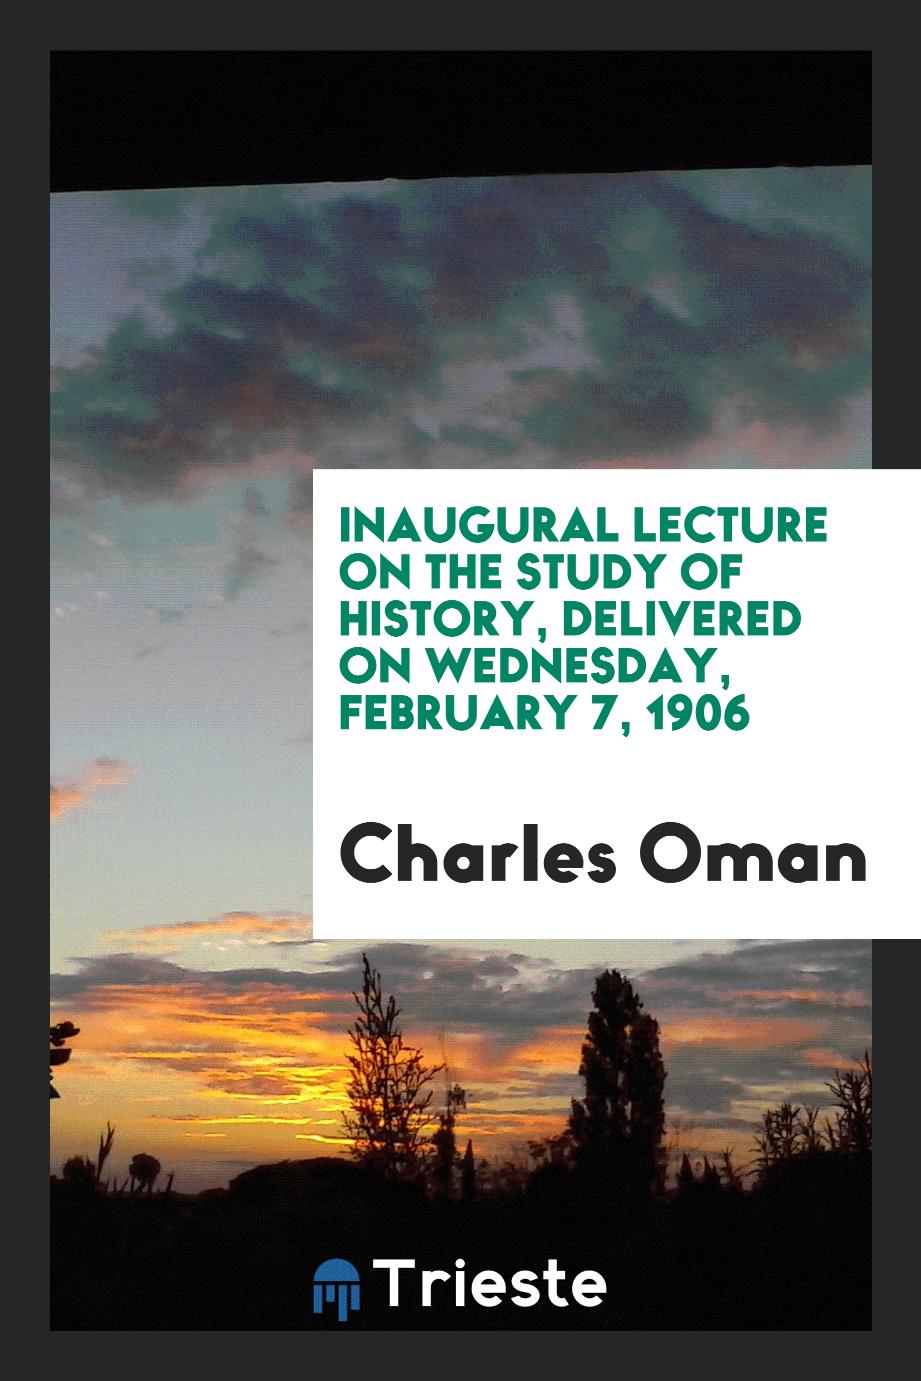 Inaugural lecture on the study of history, delivered on wednesday, february 7, 1906